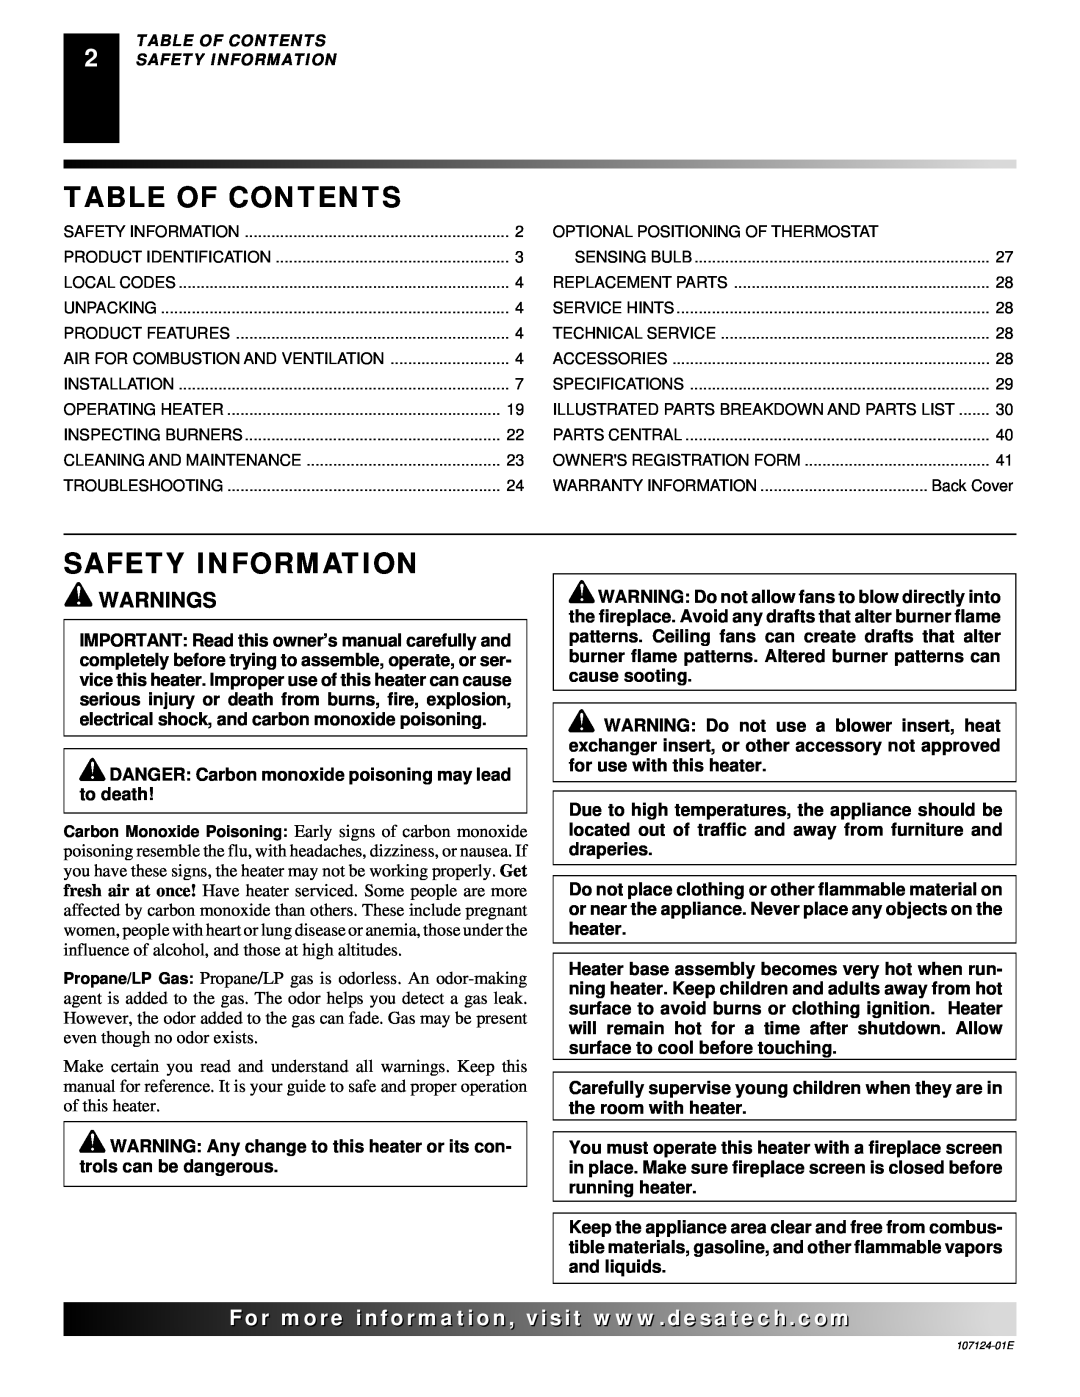 Desa CCL3018P, CRL2718P, CRL3124P, CGD3924P, CGD3018PT, CCL3930PTA, CCL3924PT Table Of Contents, Safety Information, Warnings 